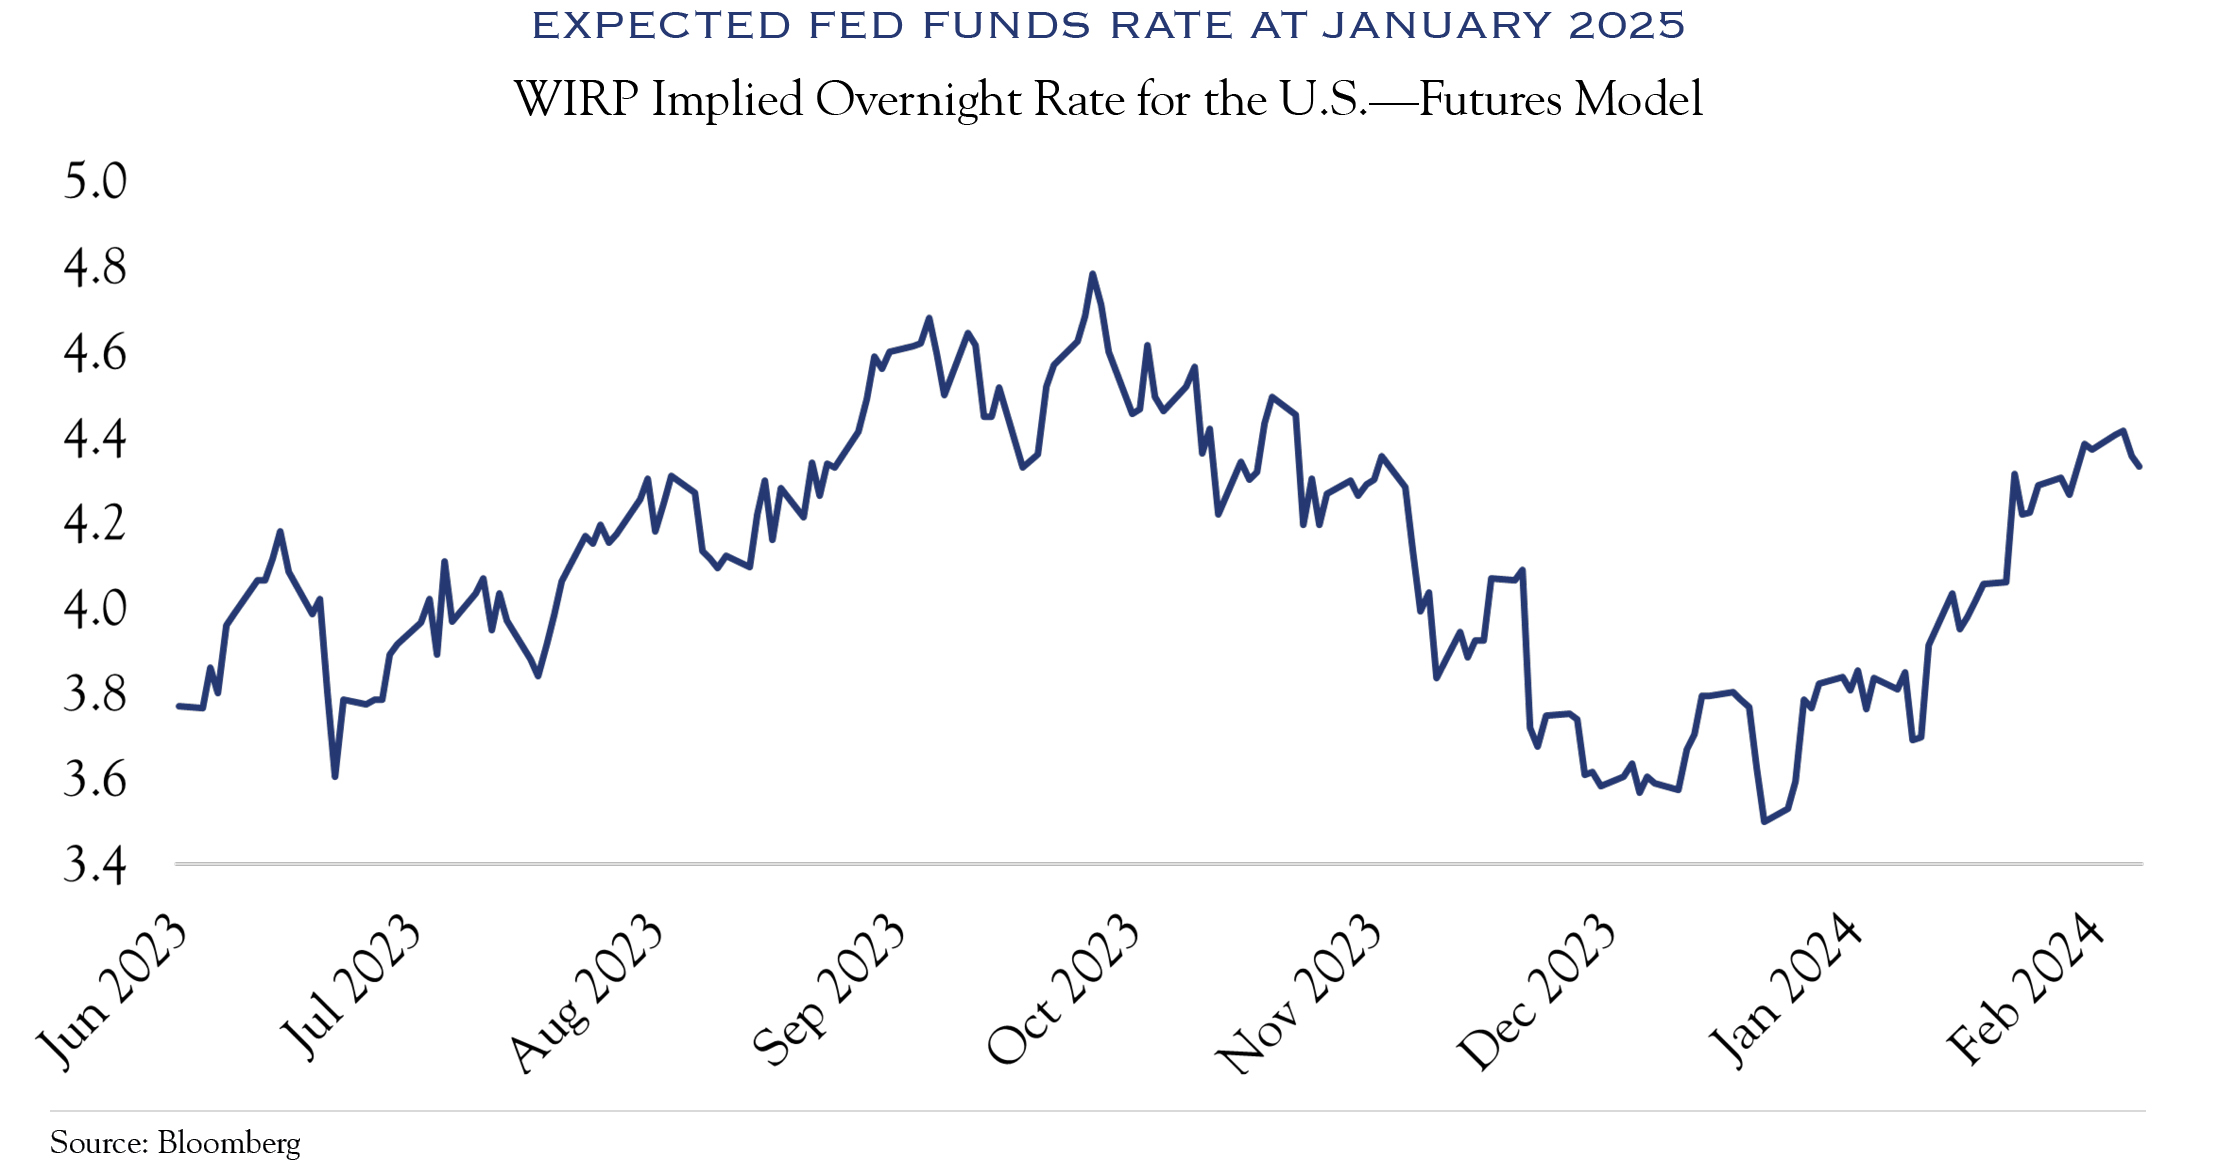 Expected Fed Funds Rate at January 2025 WIRP Implied Overnight Rate for the U.S.—Futures Model